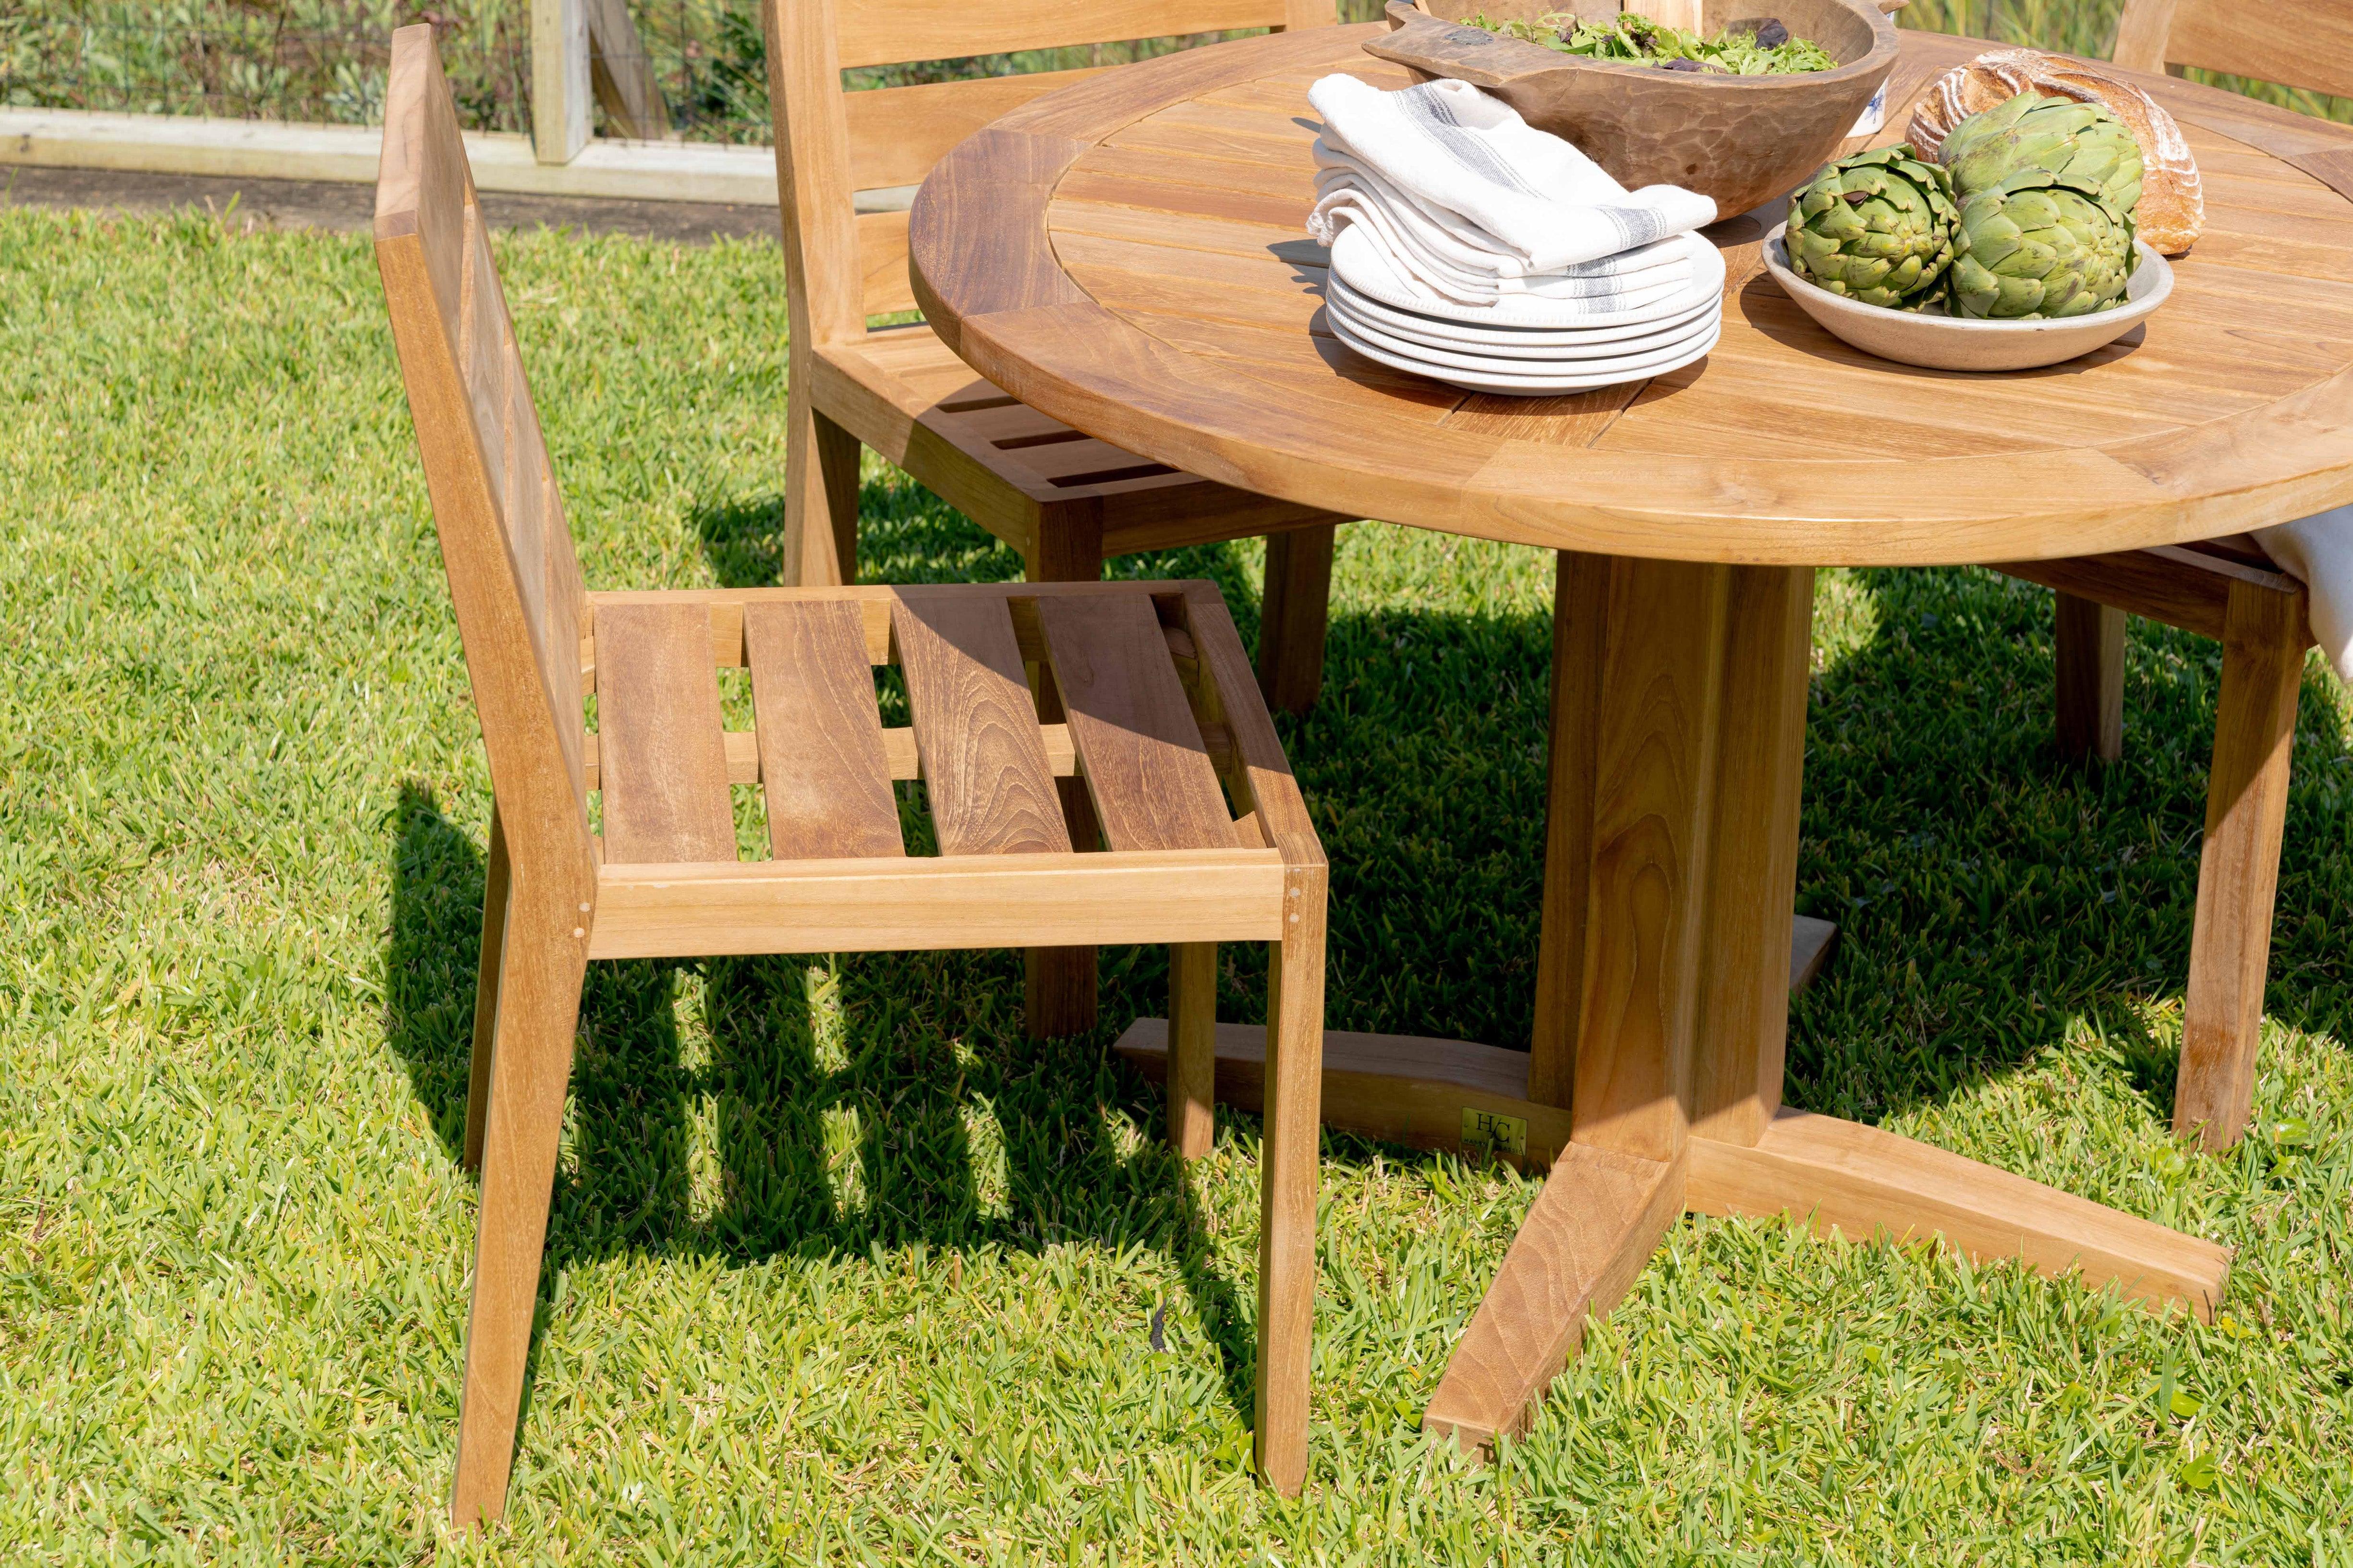 small outdoor pedestal table with chairs set